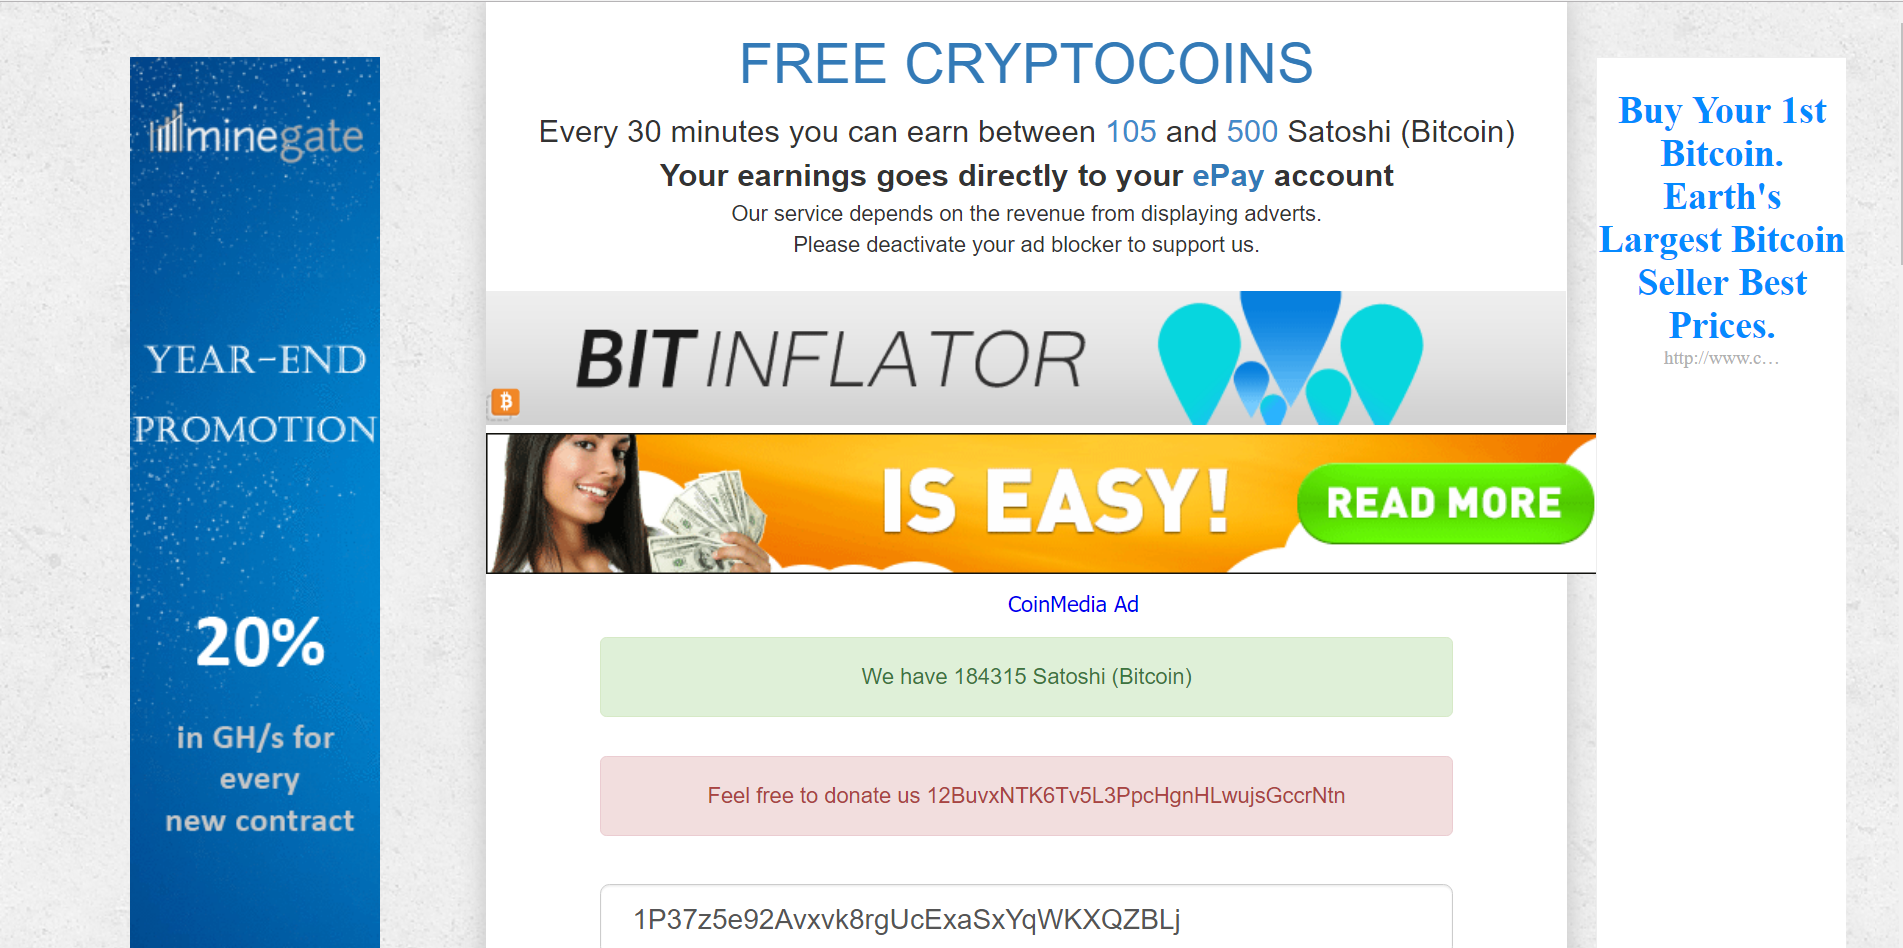 Make you bitcoin faucet site for $10 - SEOClerks